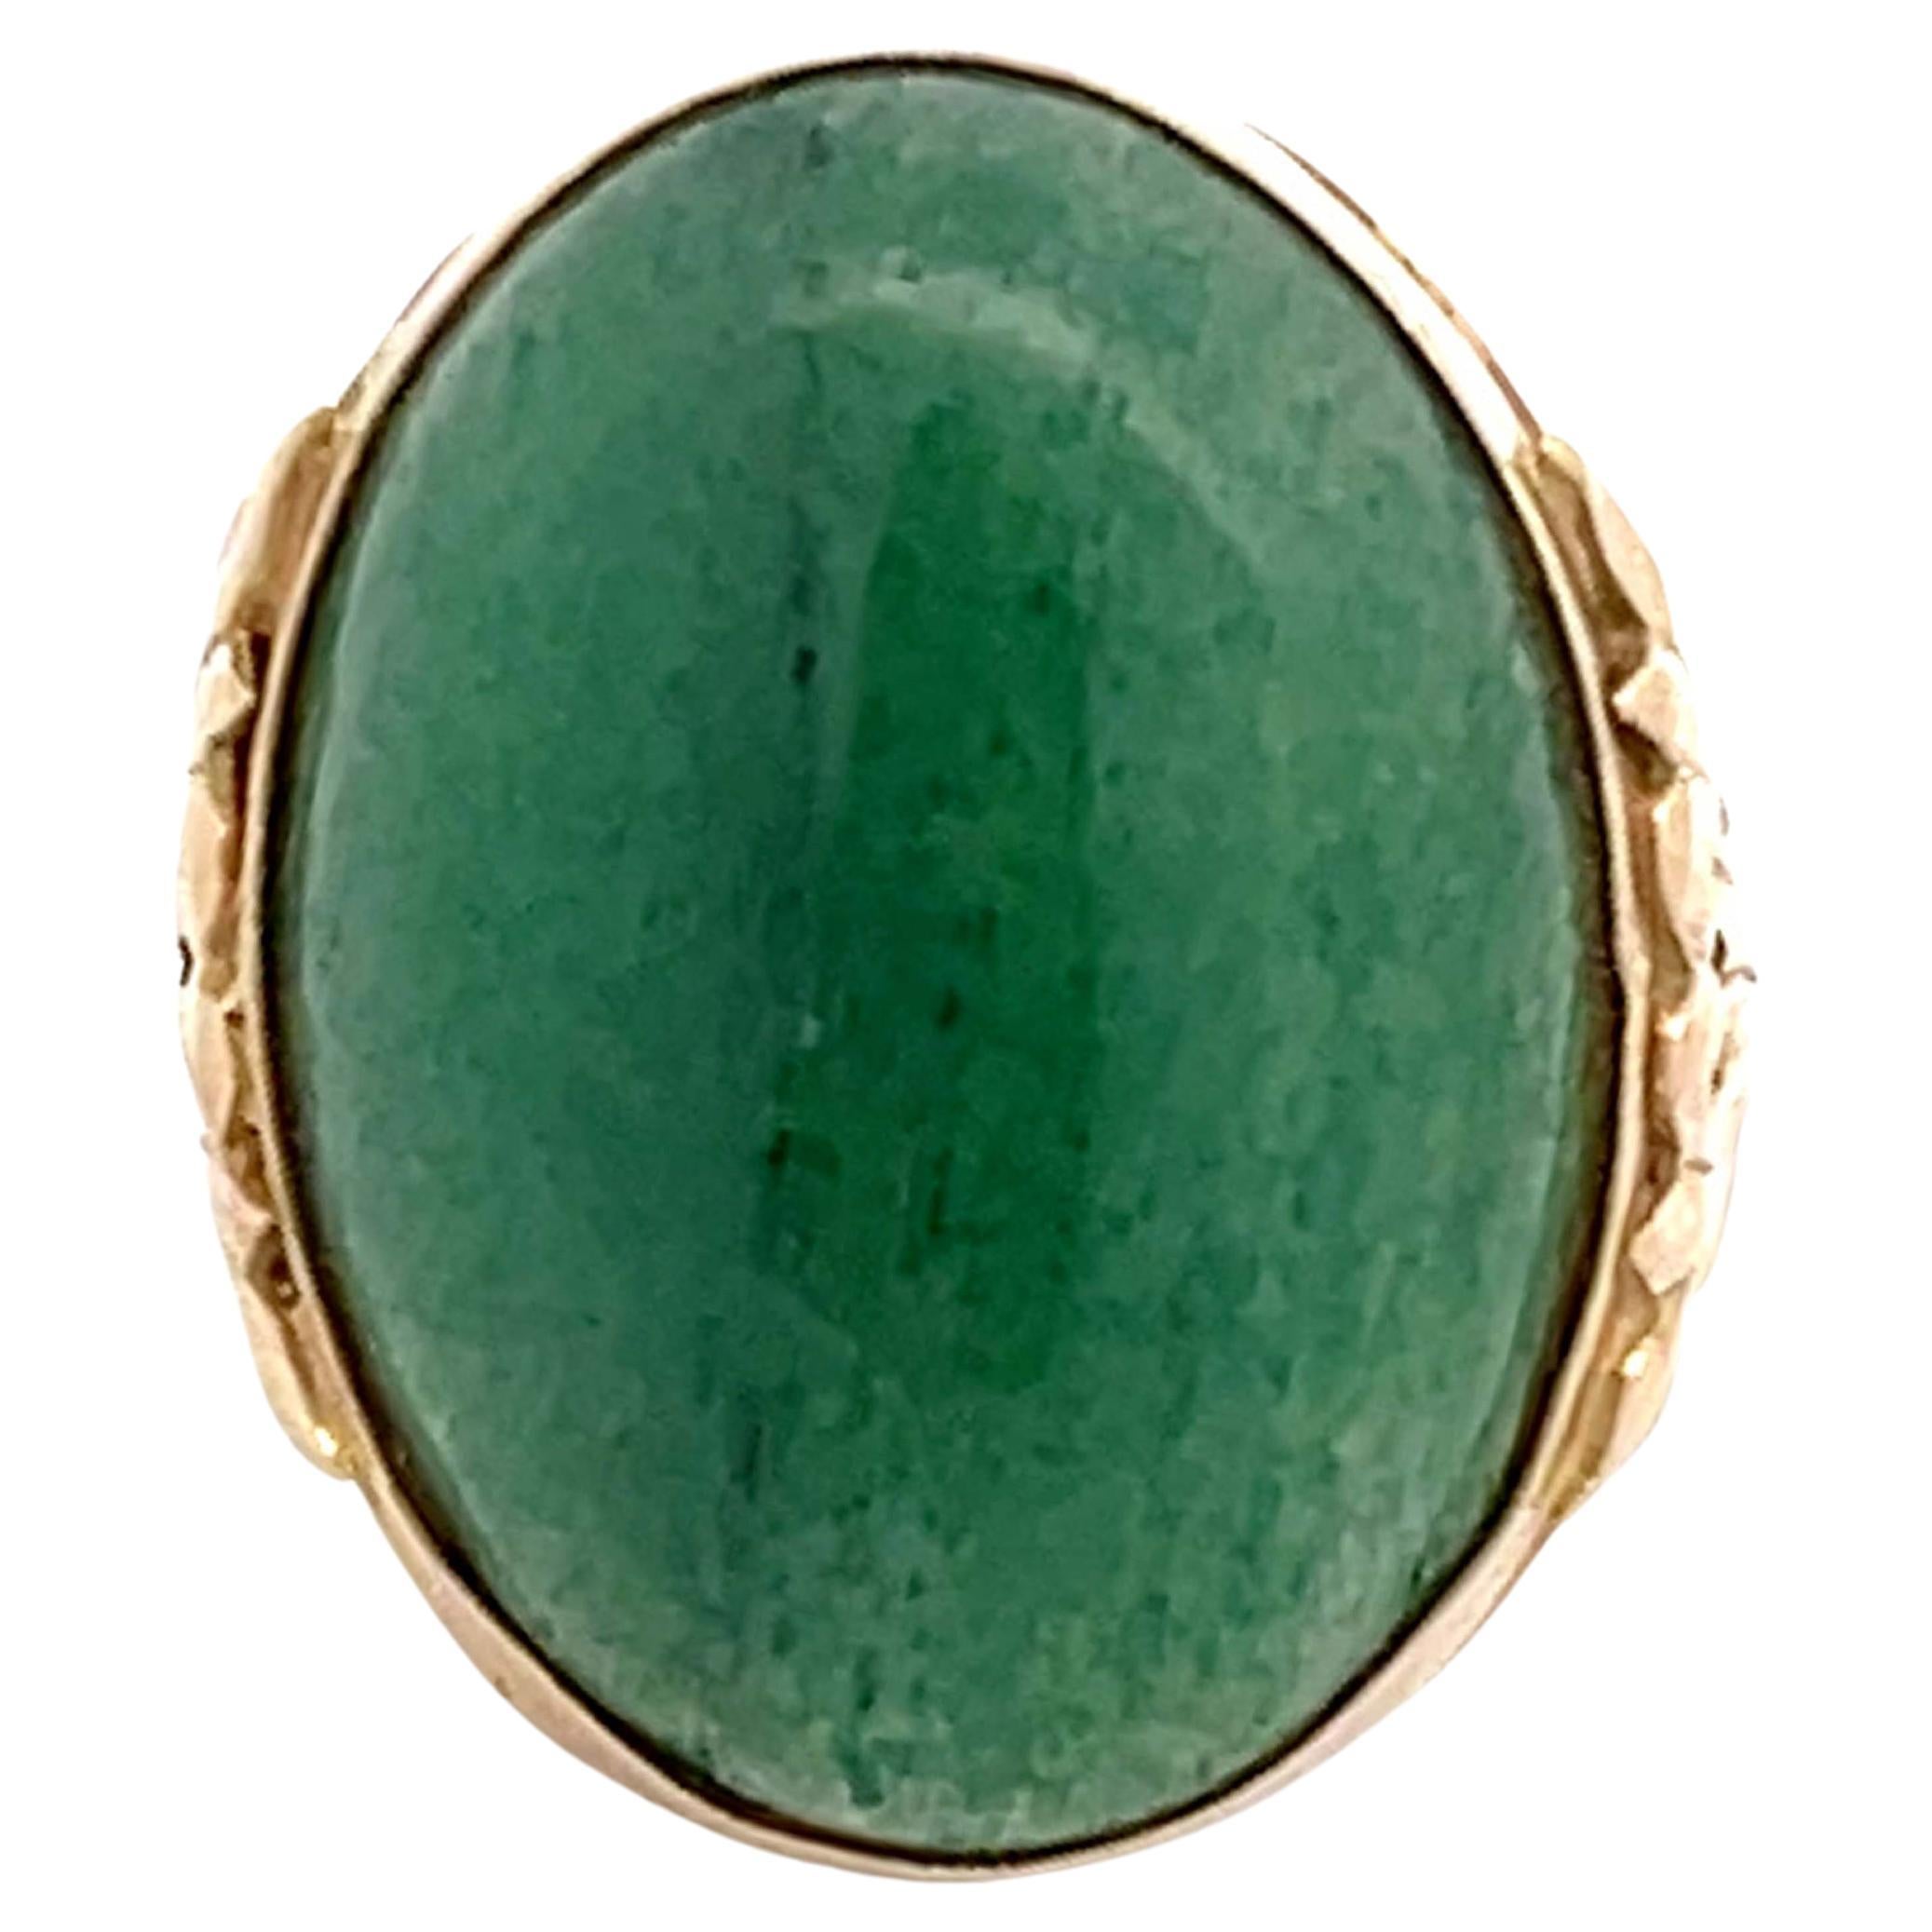 What is the best quality jade?